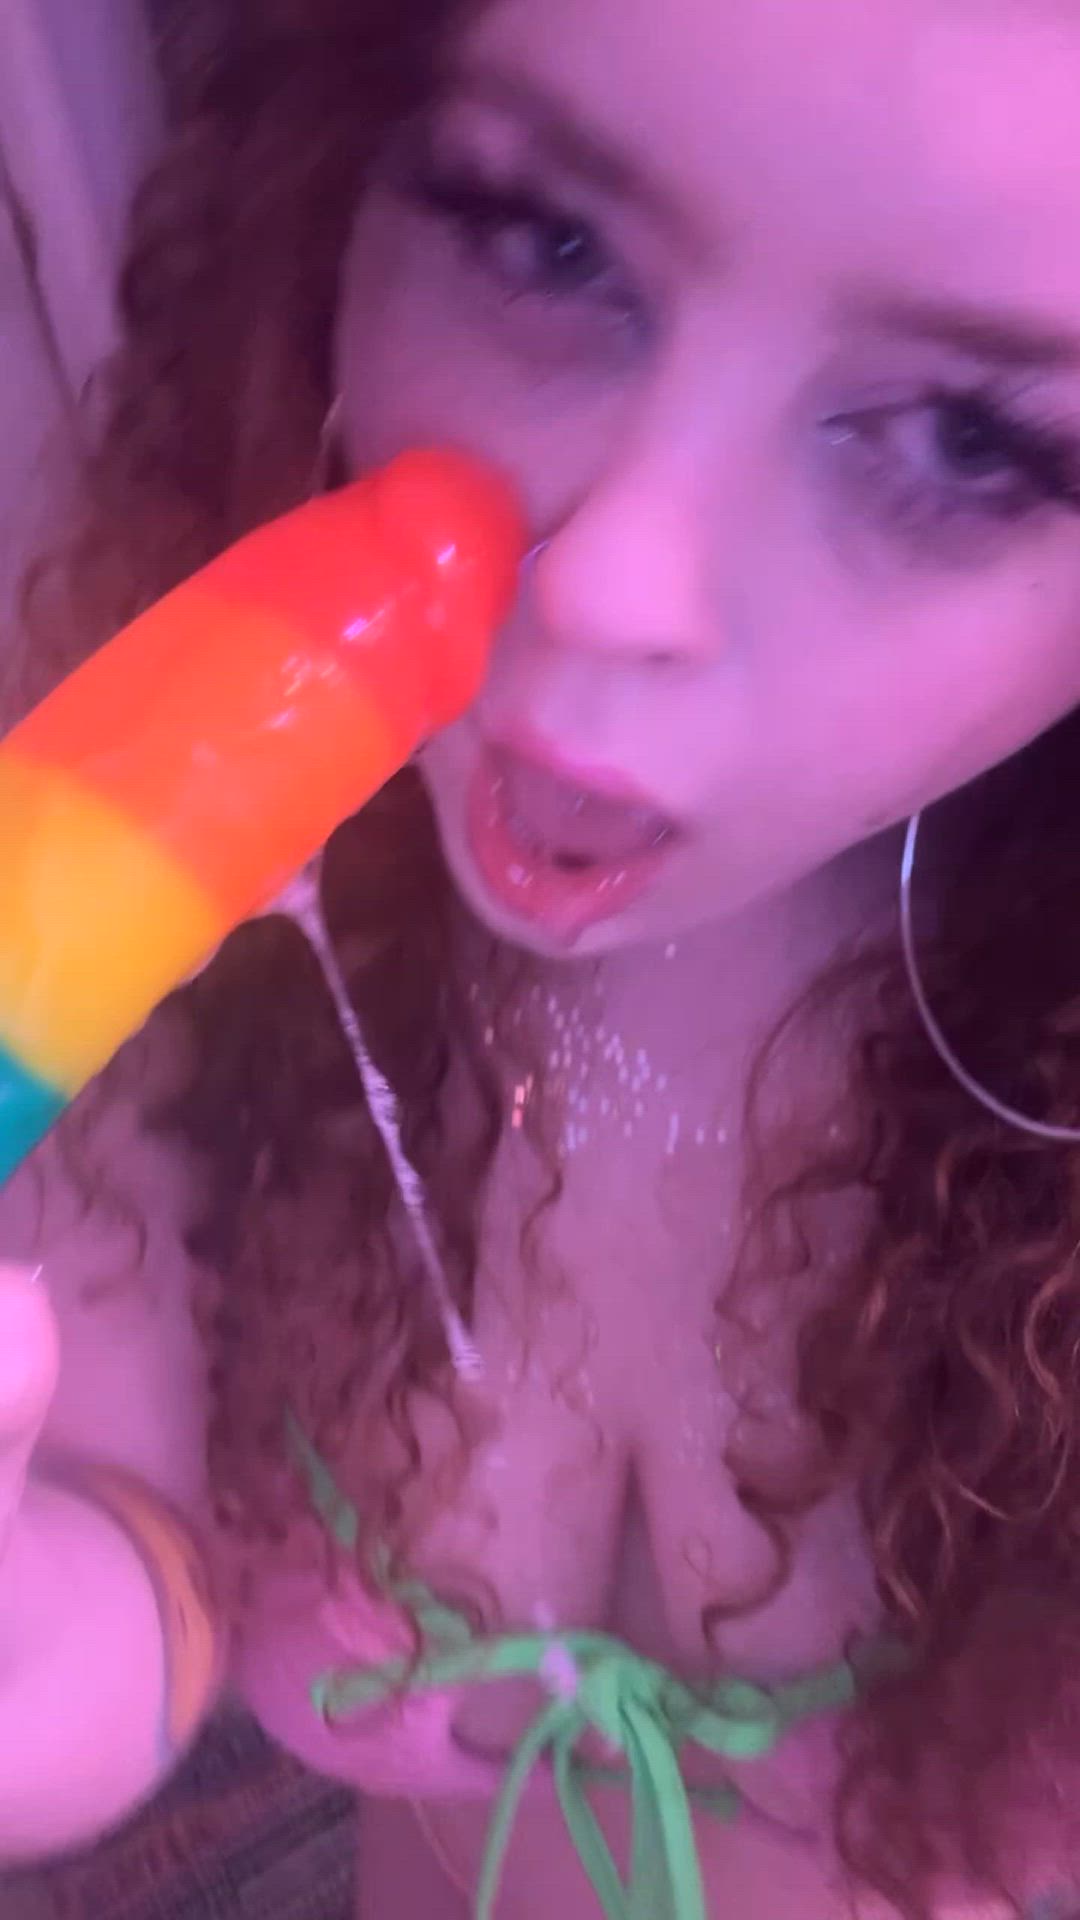 Dildo porn video with onlyfans model  <strong>@strwbby</strong>